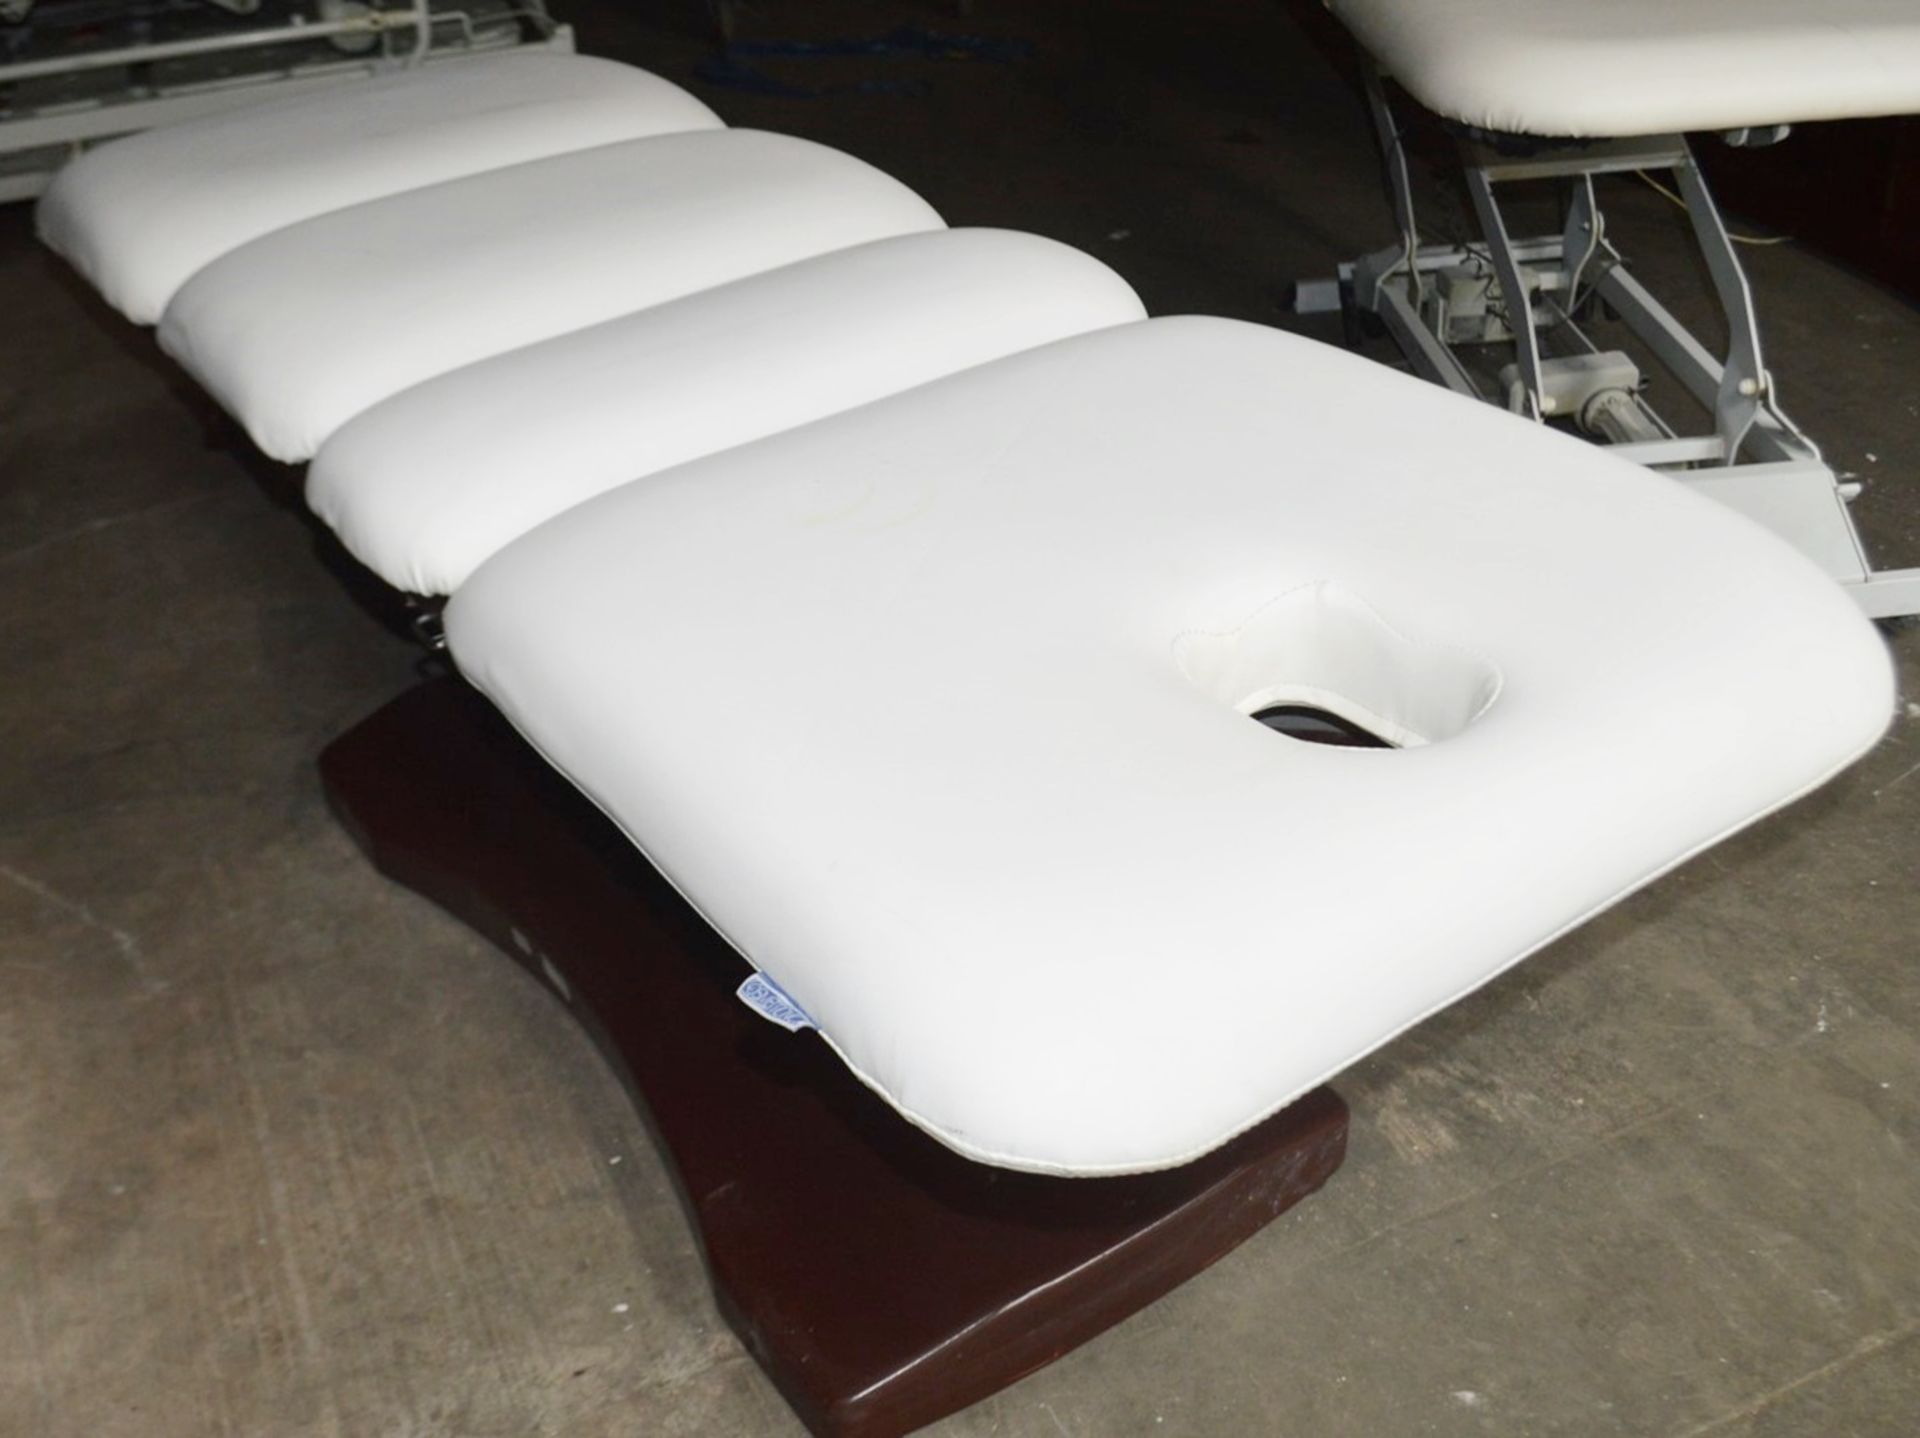 1 x COSMETRONIC Professional 4-Function Electric-Hydraulic Massage Table Spa Bed (Requires Remote) - Image 7 of 7